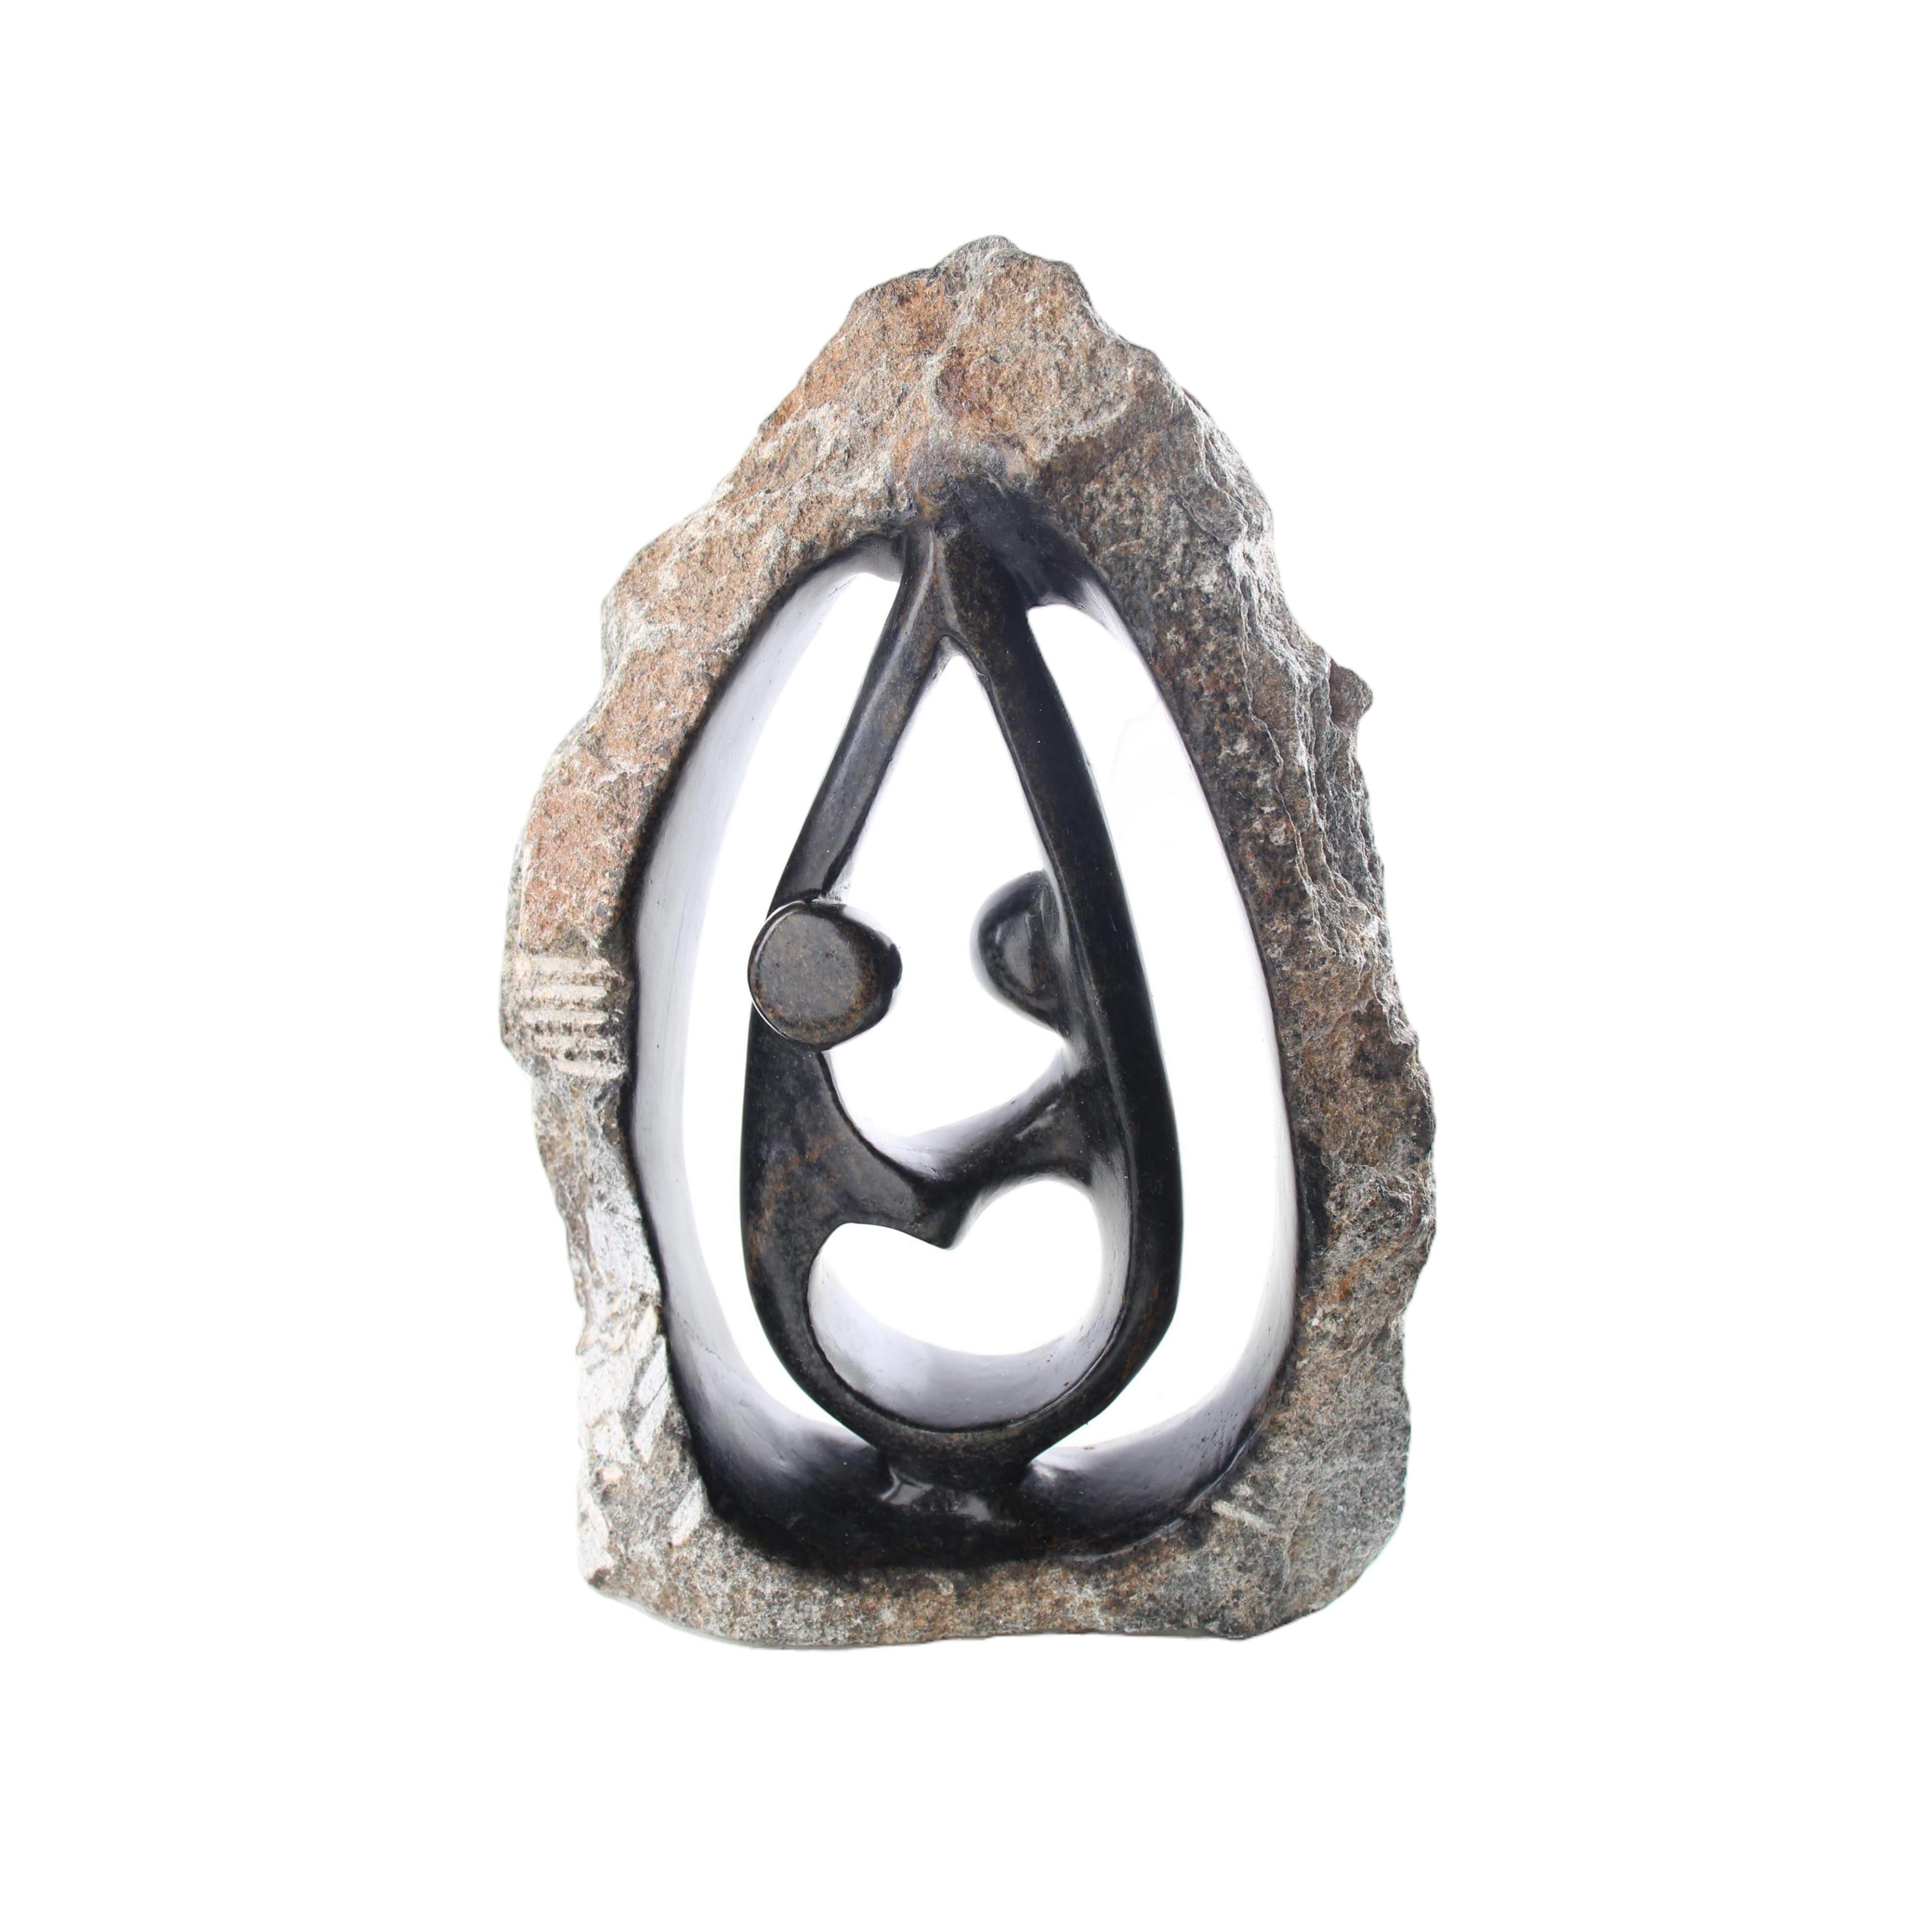 Shona Tribe Serpentine Stone Couples ~10.2" Tall - Couples